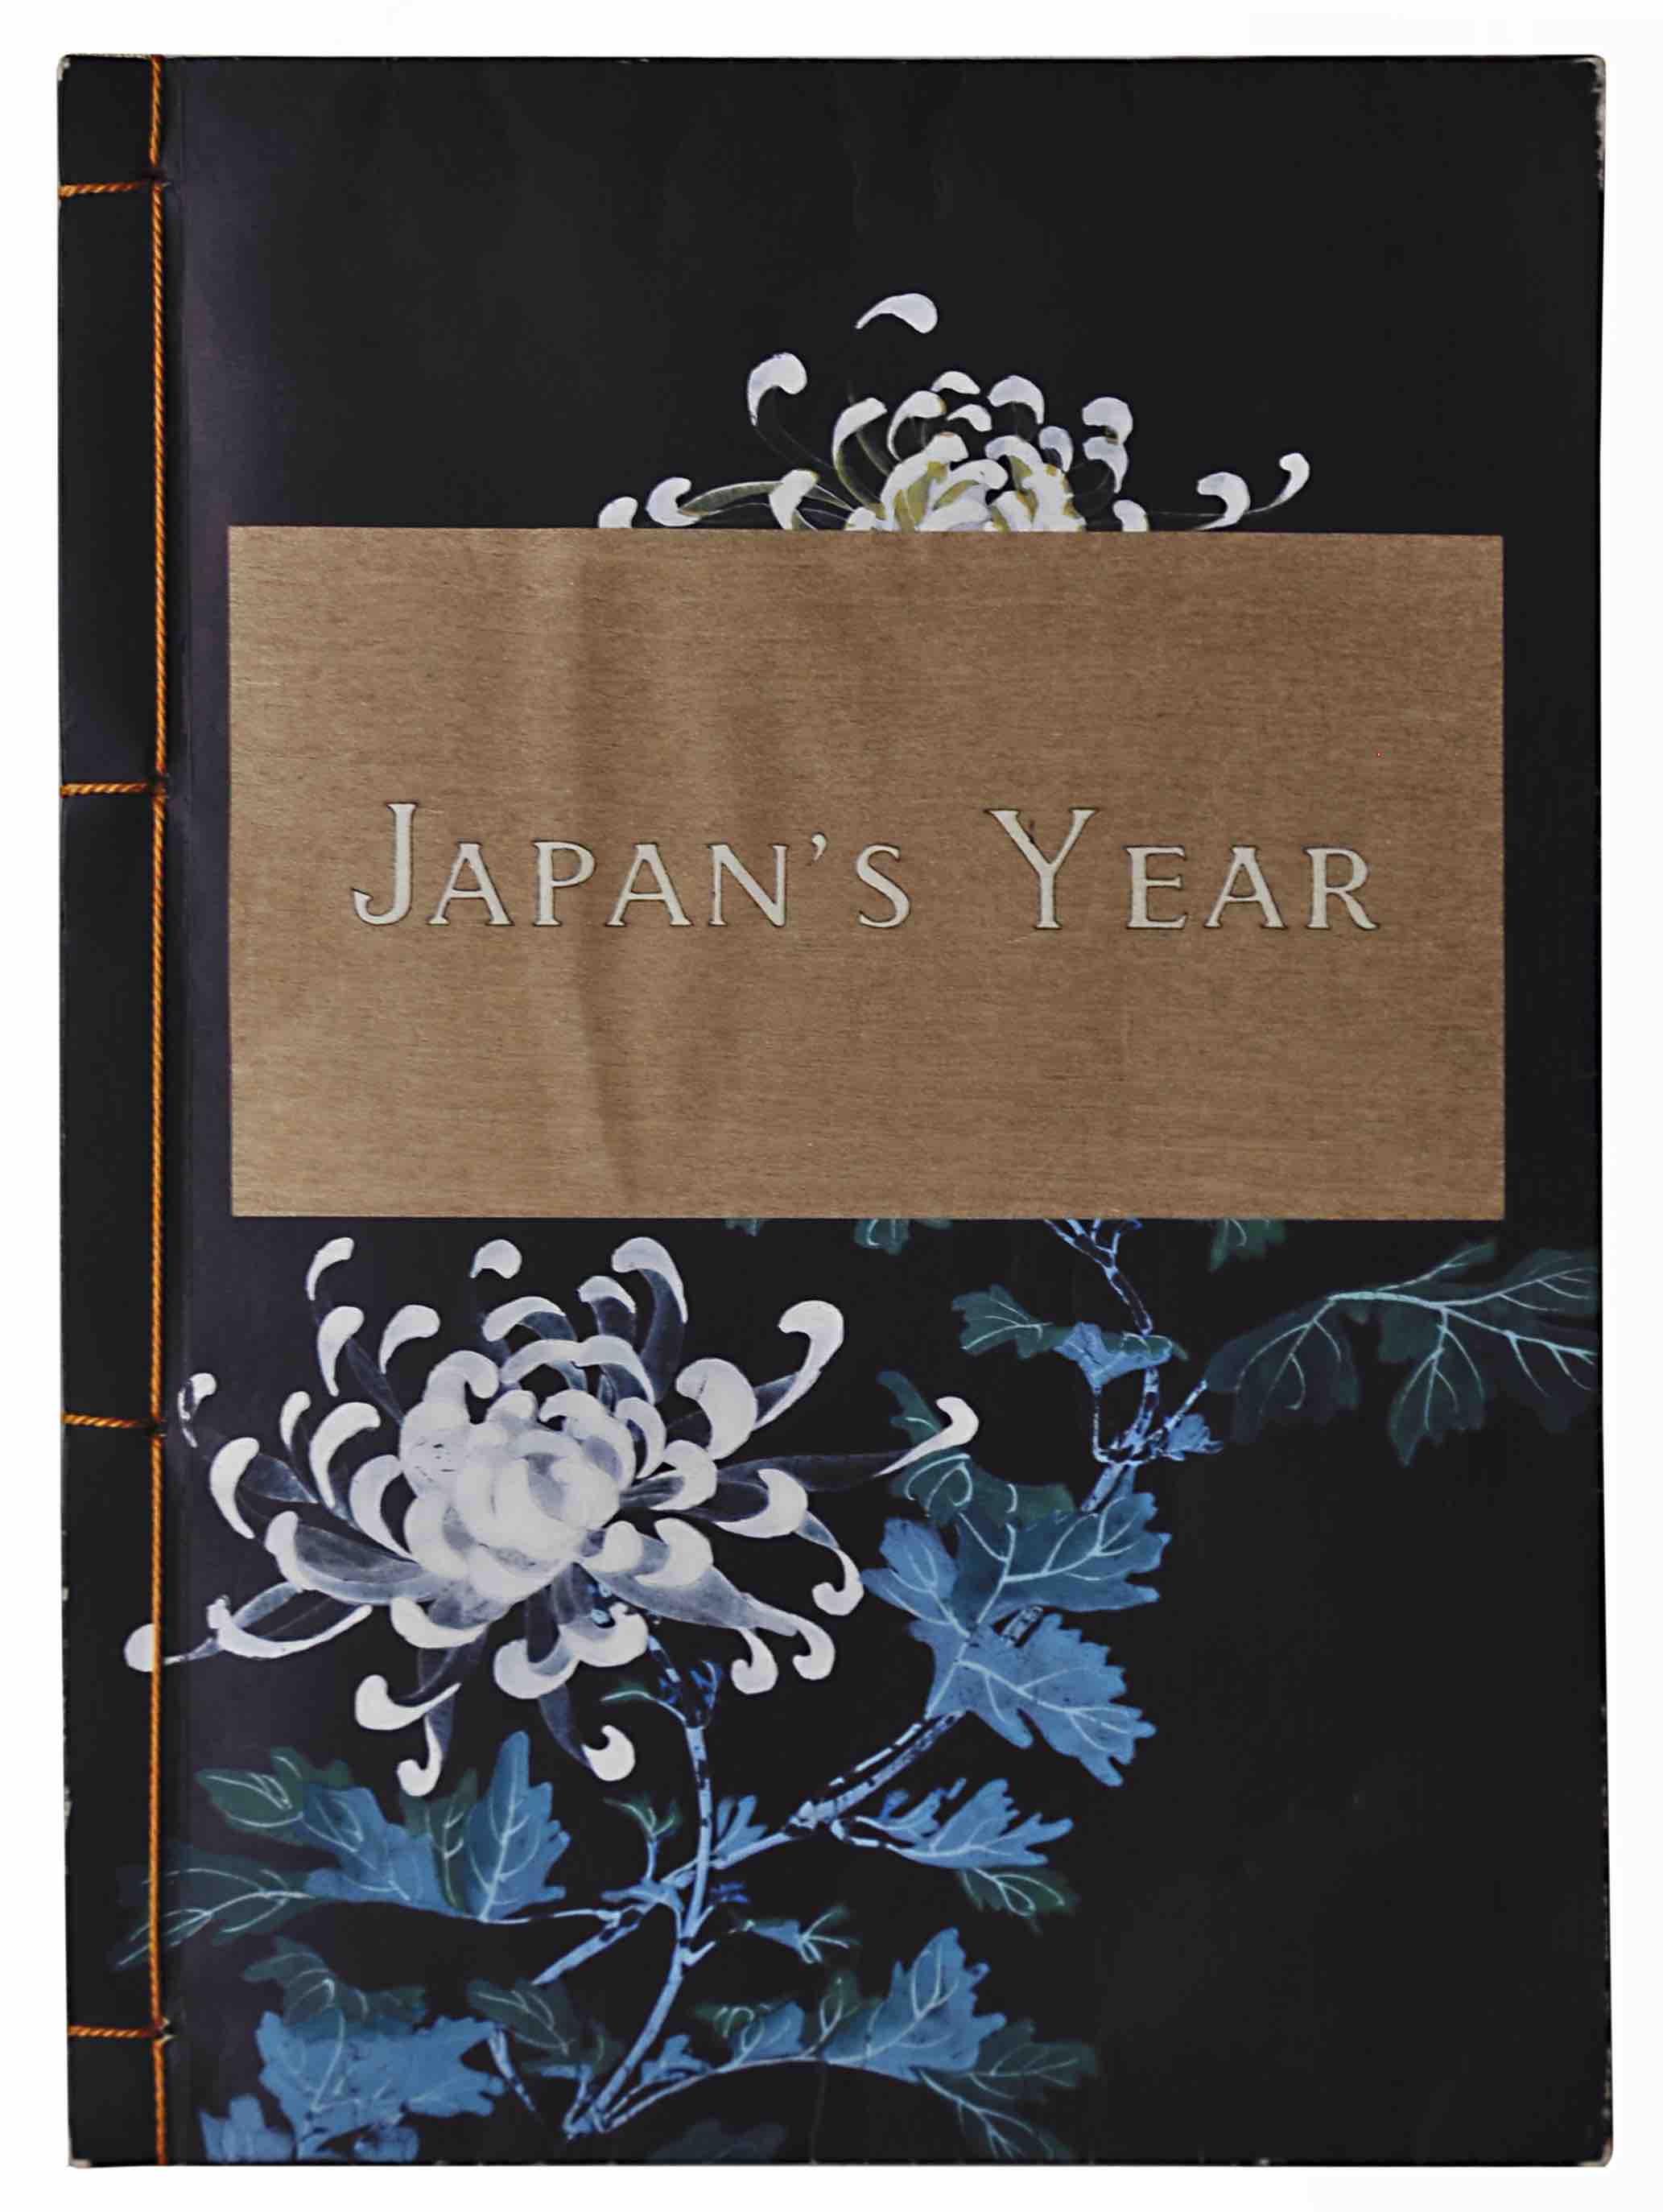 CARROTHERS, JULIA DODGE: - Japan's Year. Illustrated by Japanese Artists. Tokyo, T. Hasegawa, Meiji 38 (1905).